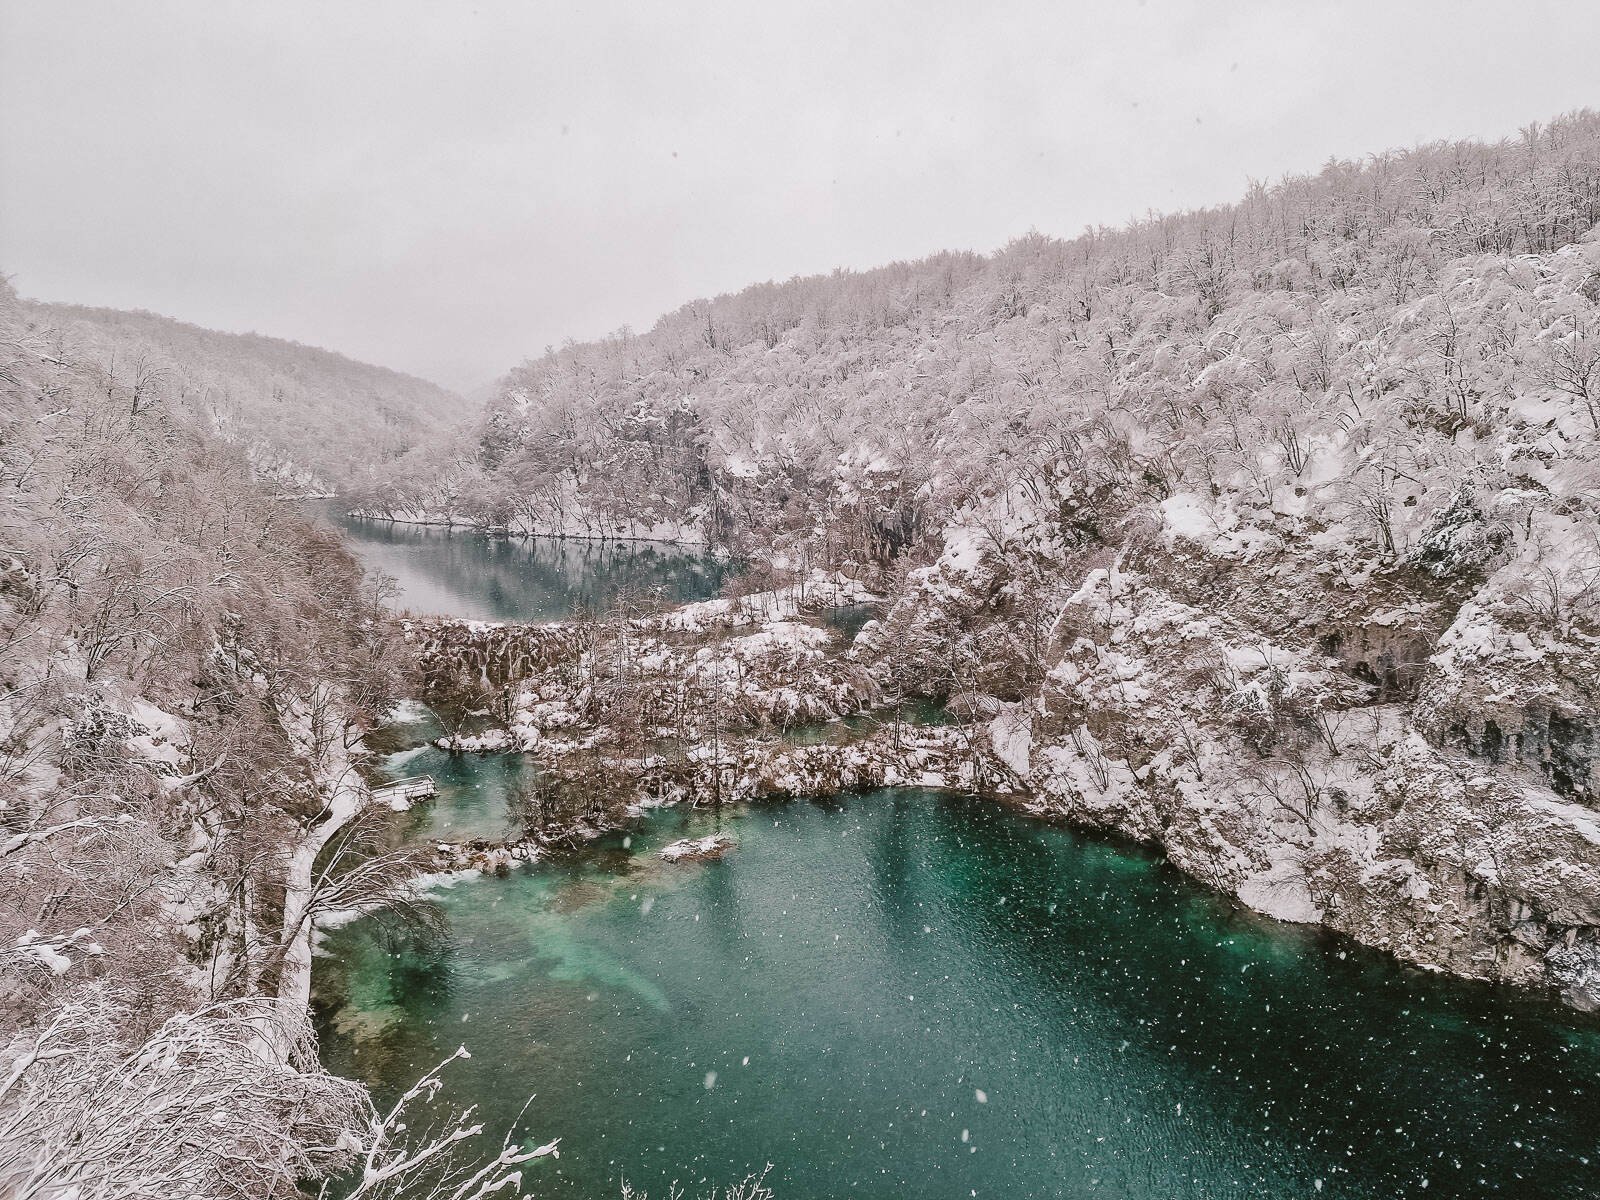 Snow is falling on aview of a turquoise blue green lake in a canyon with snow covered cliffs and trees on either side and grey sky in Plitvice snow